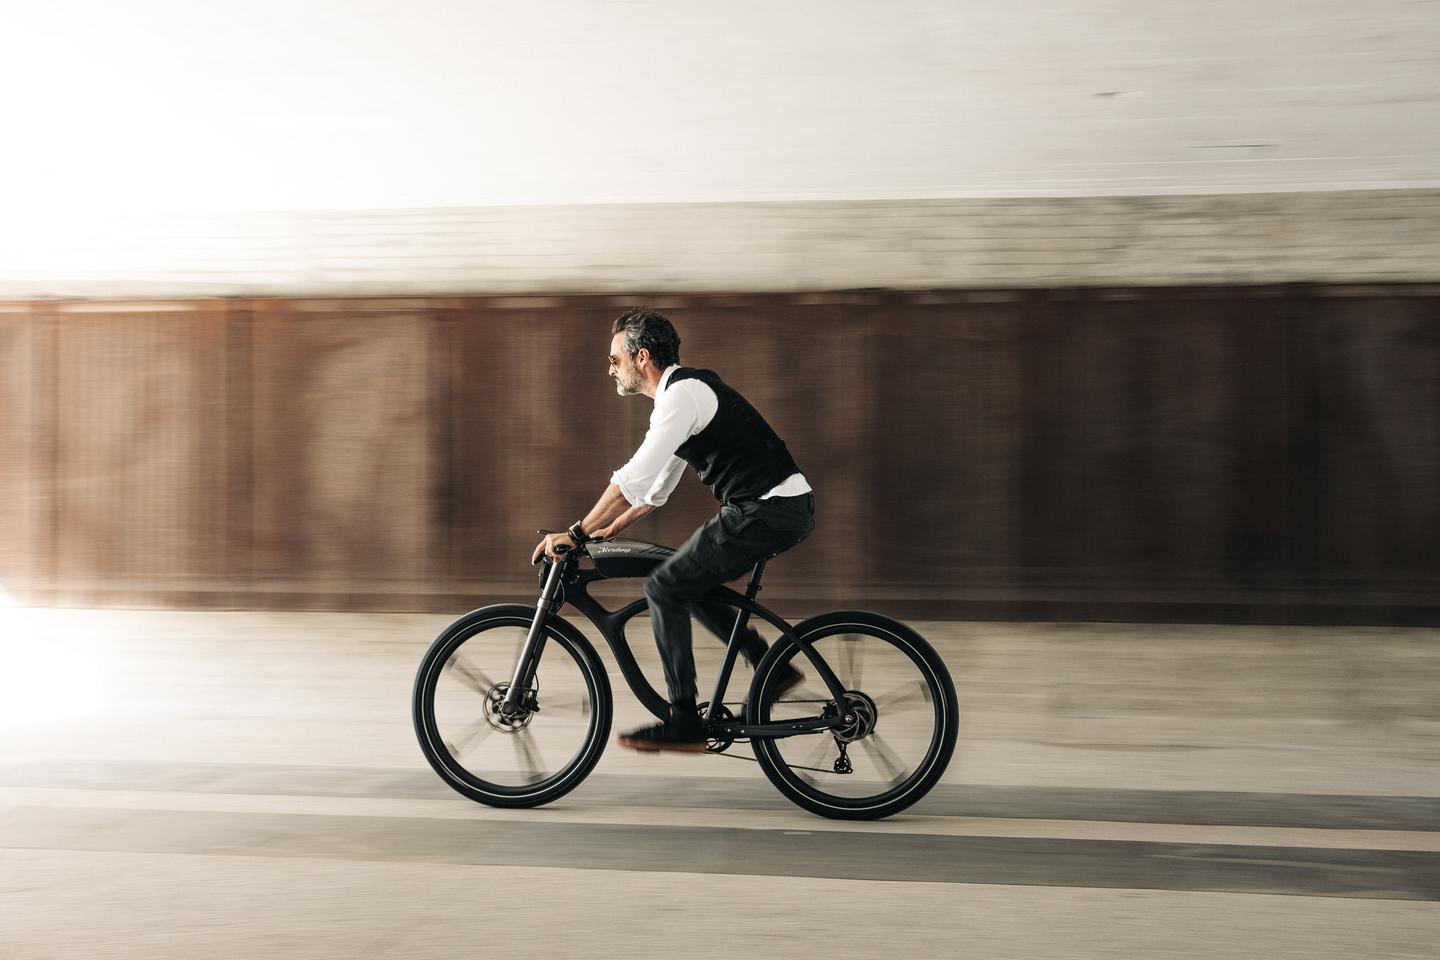 Not just another moto-inspired carbon ebike, the Noordung comes with a battery pack with integrated Bluetooth, "high-fidelity" speakers, and onboard air quality sensors